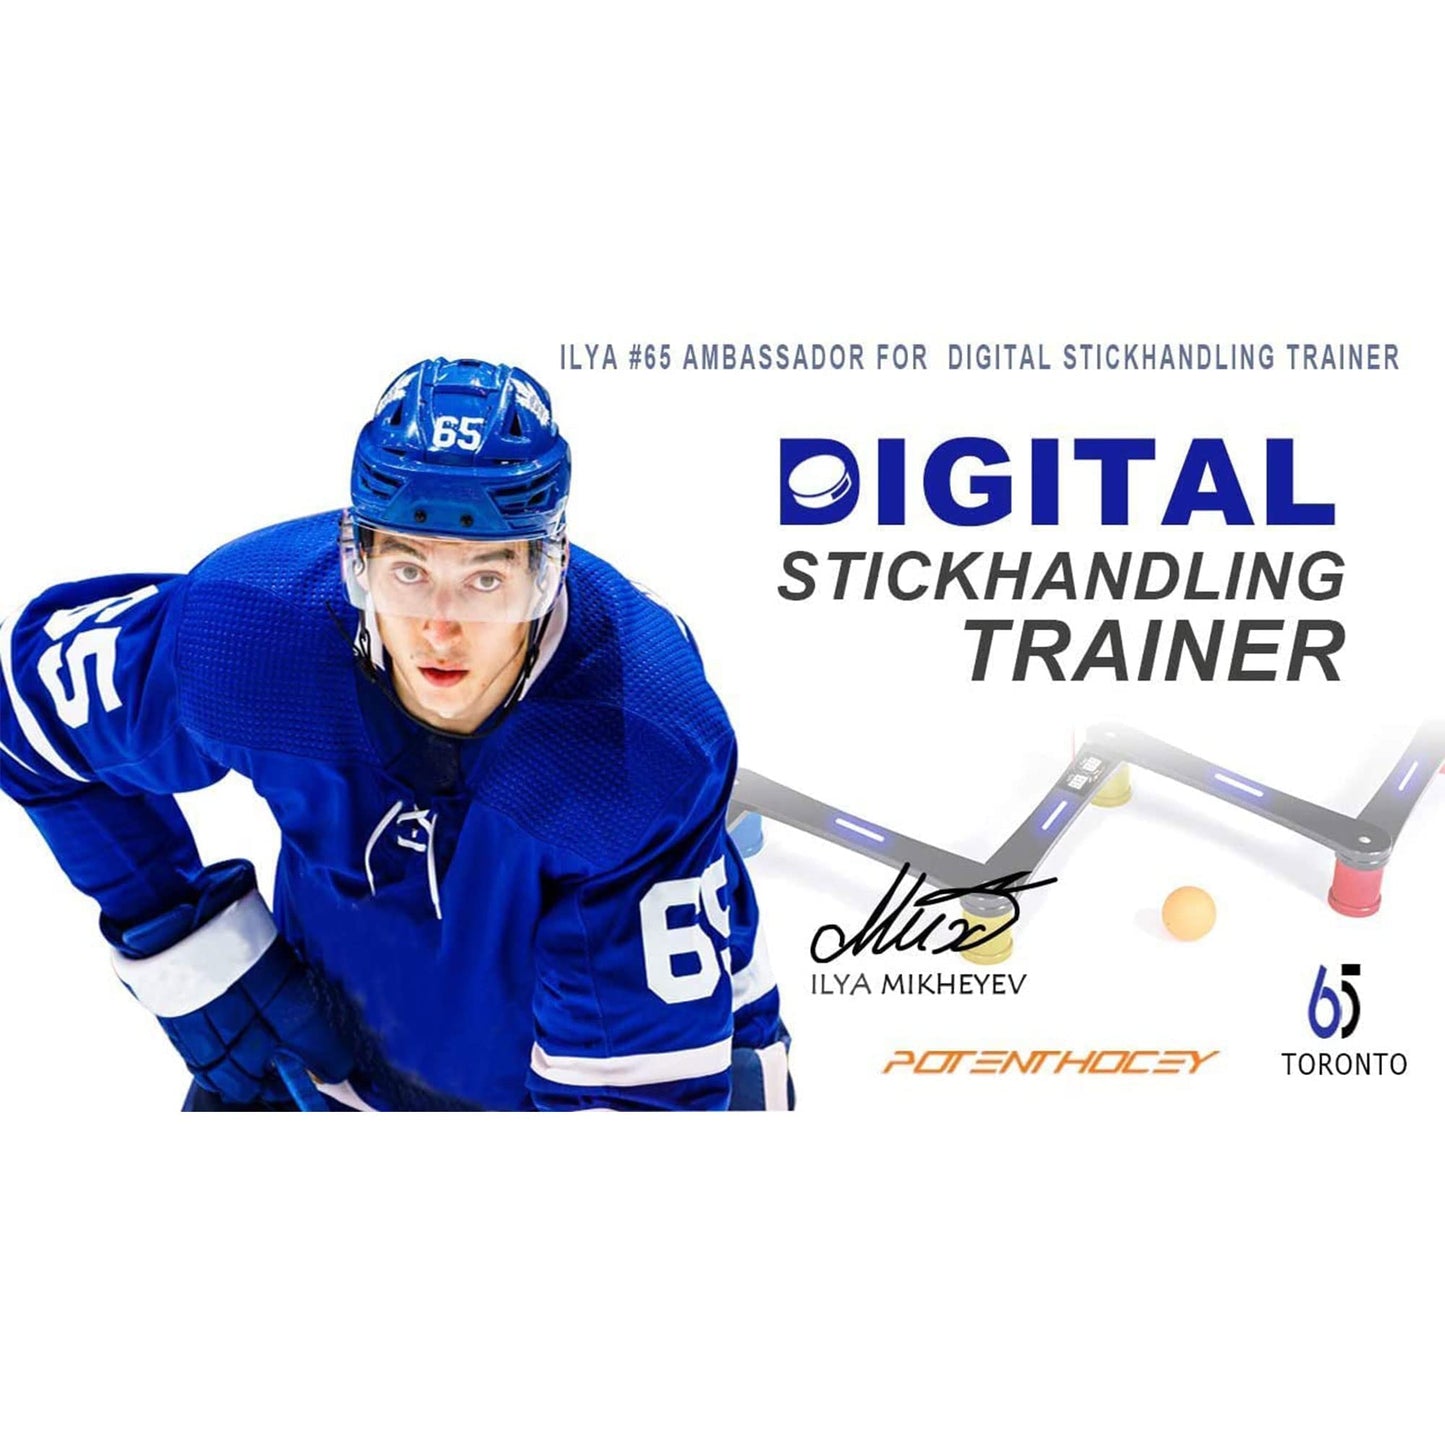 Potent Hockey Training Equipment - Digital Stickhandling Trainer - Portable Stick Handling Aid - On & Off Ice Tool - Practice Puck Control - Best Gift for Hockey Players - Trusted by The Pros